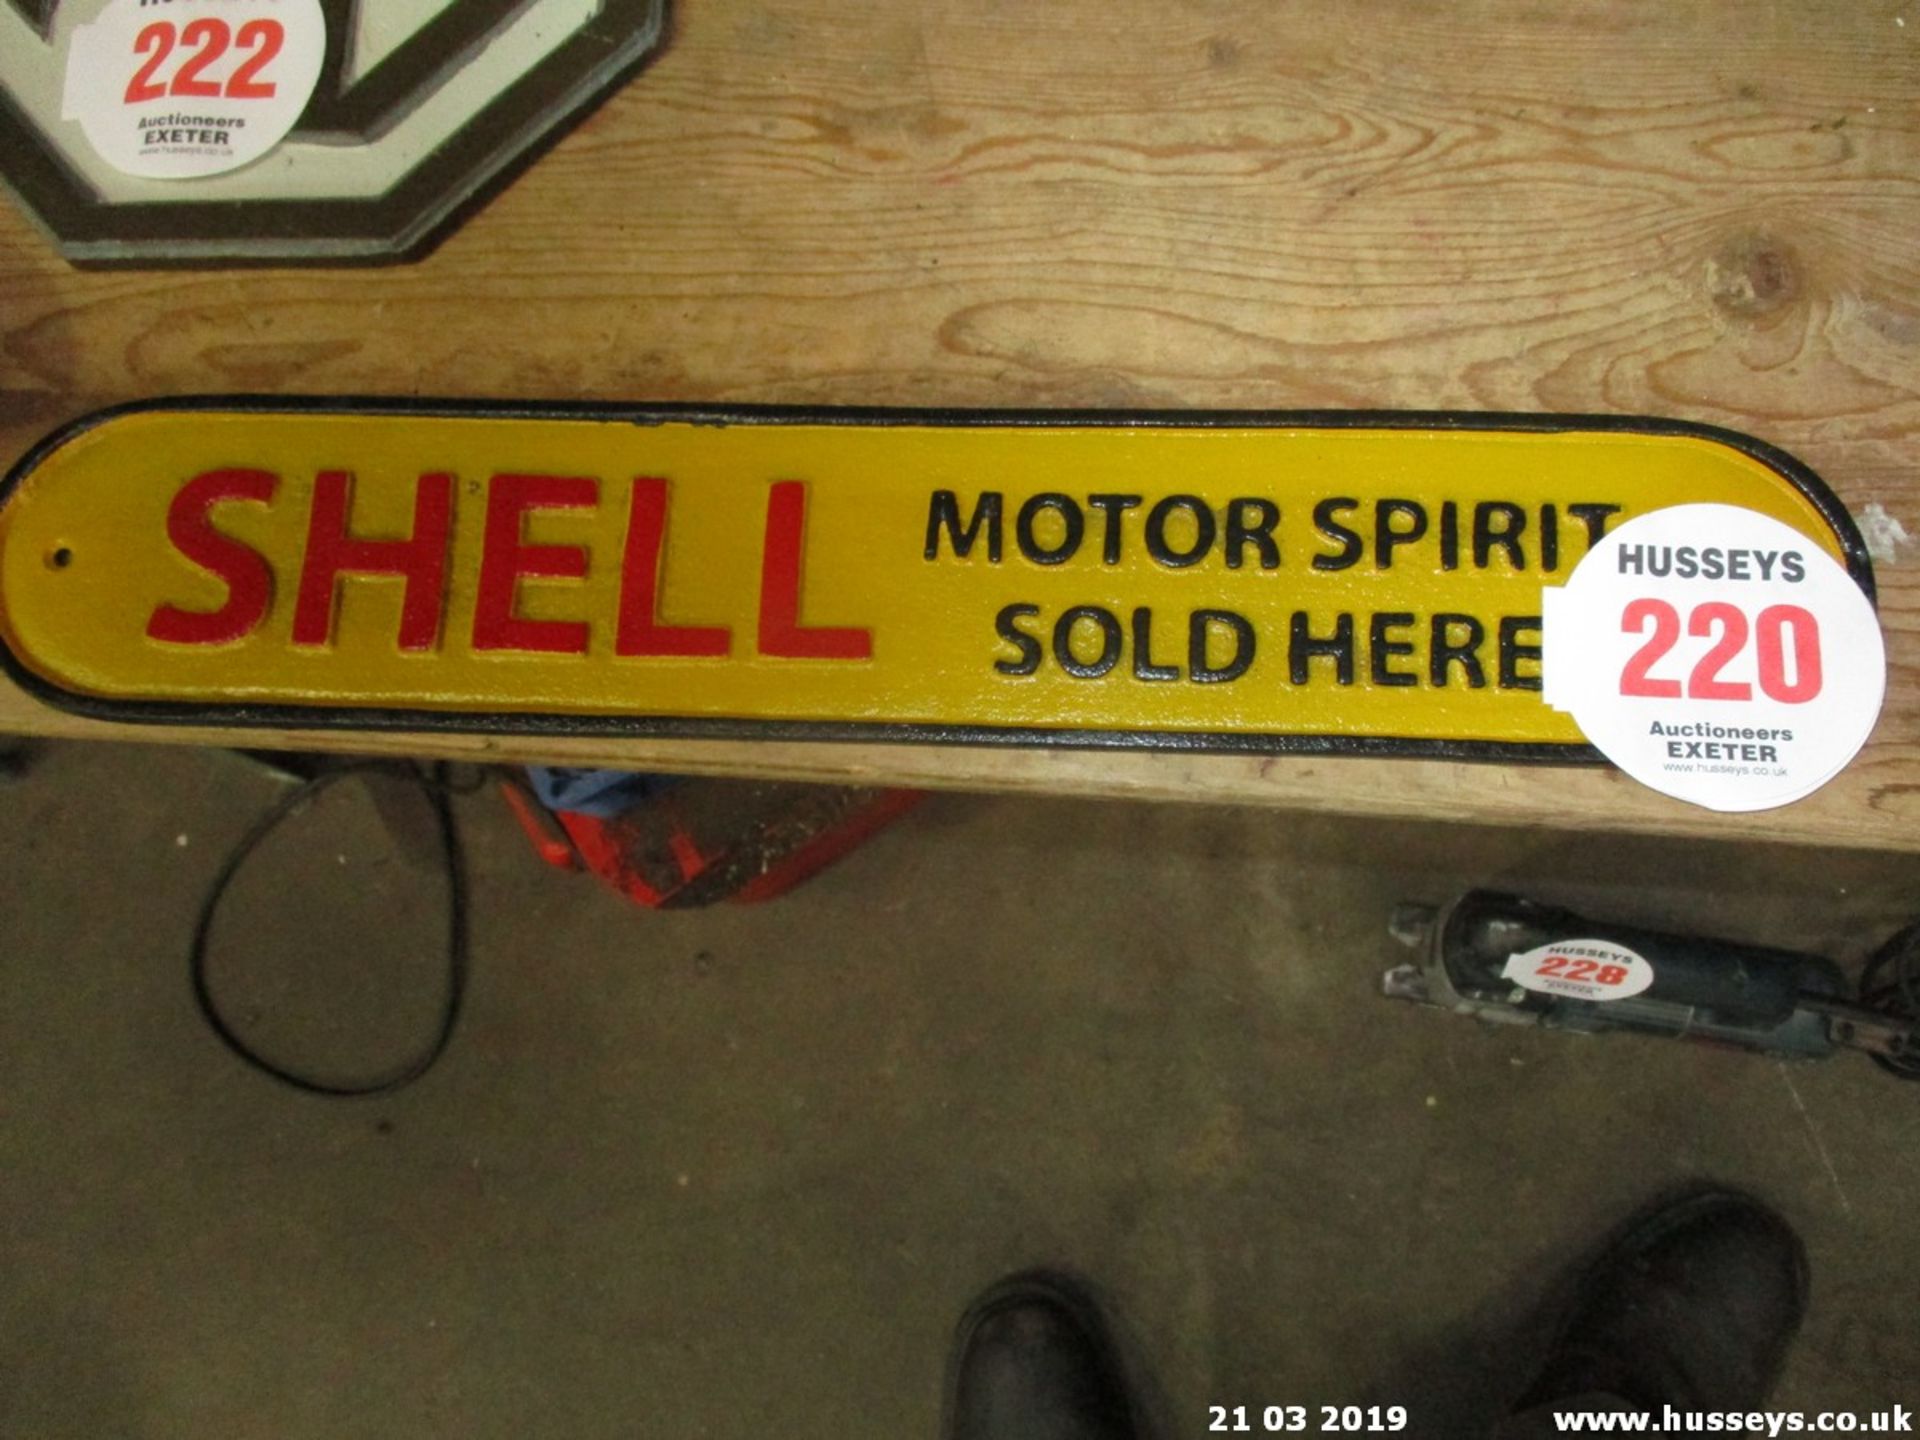 SHELL SIGN